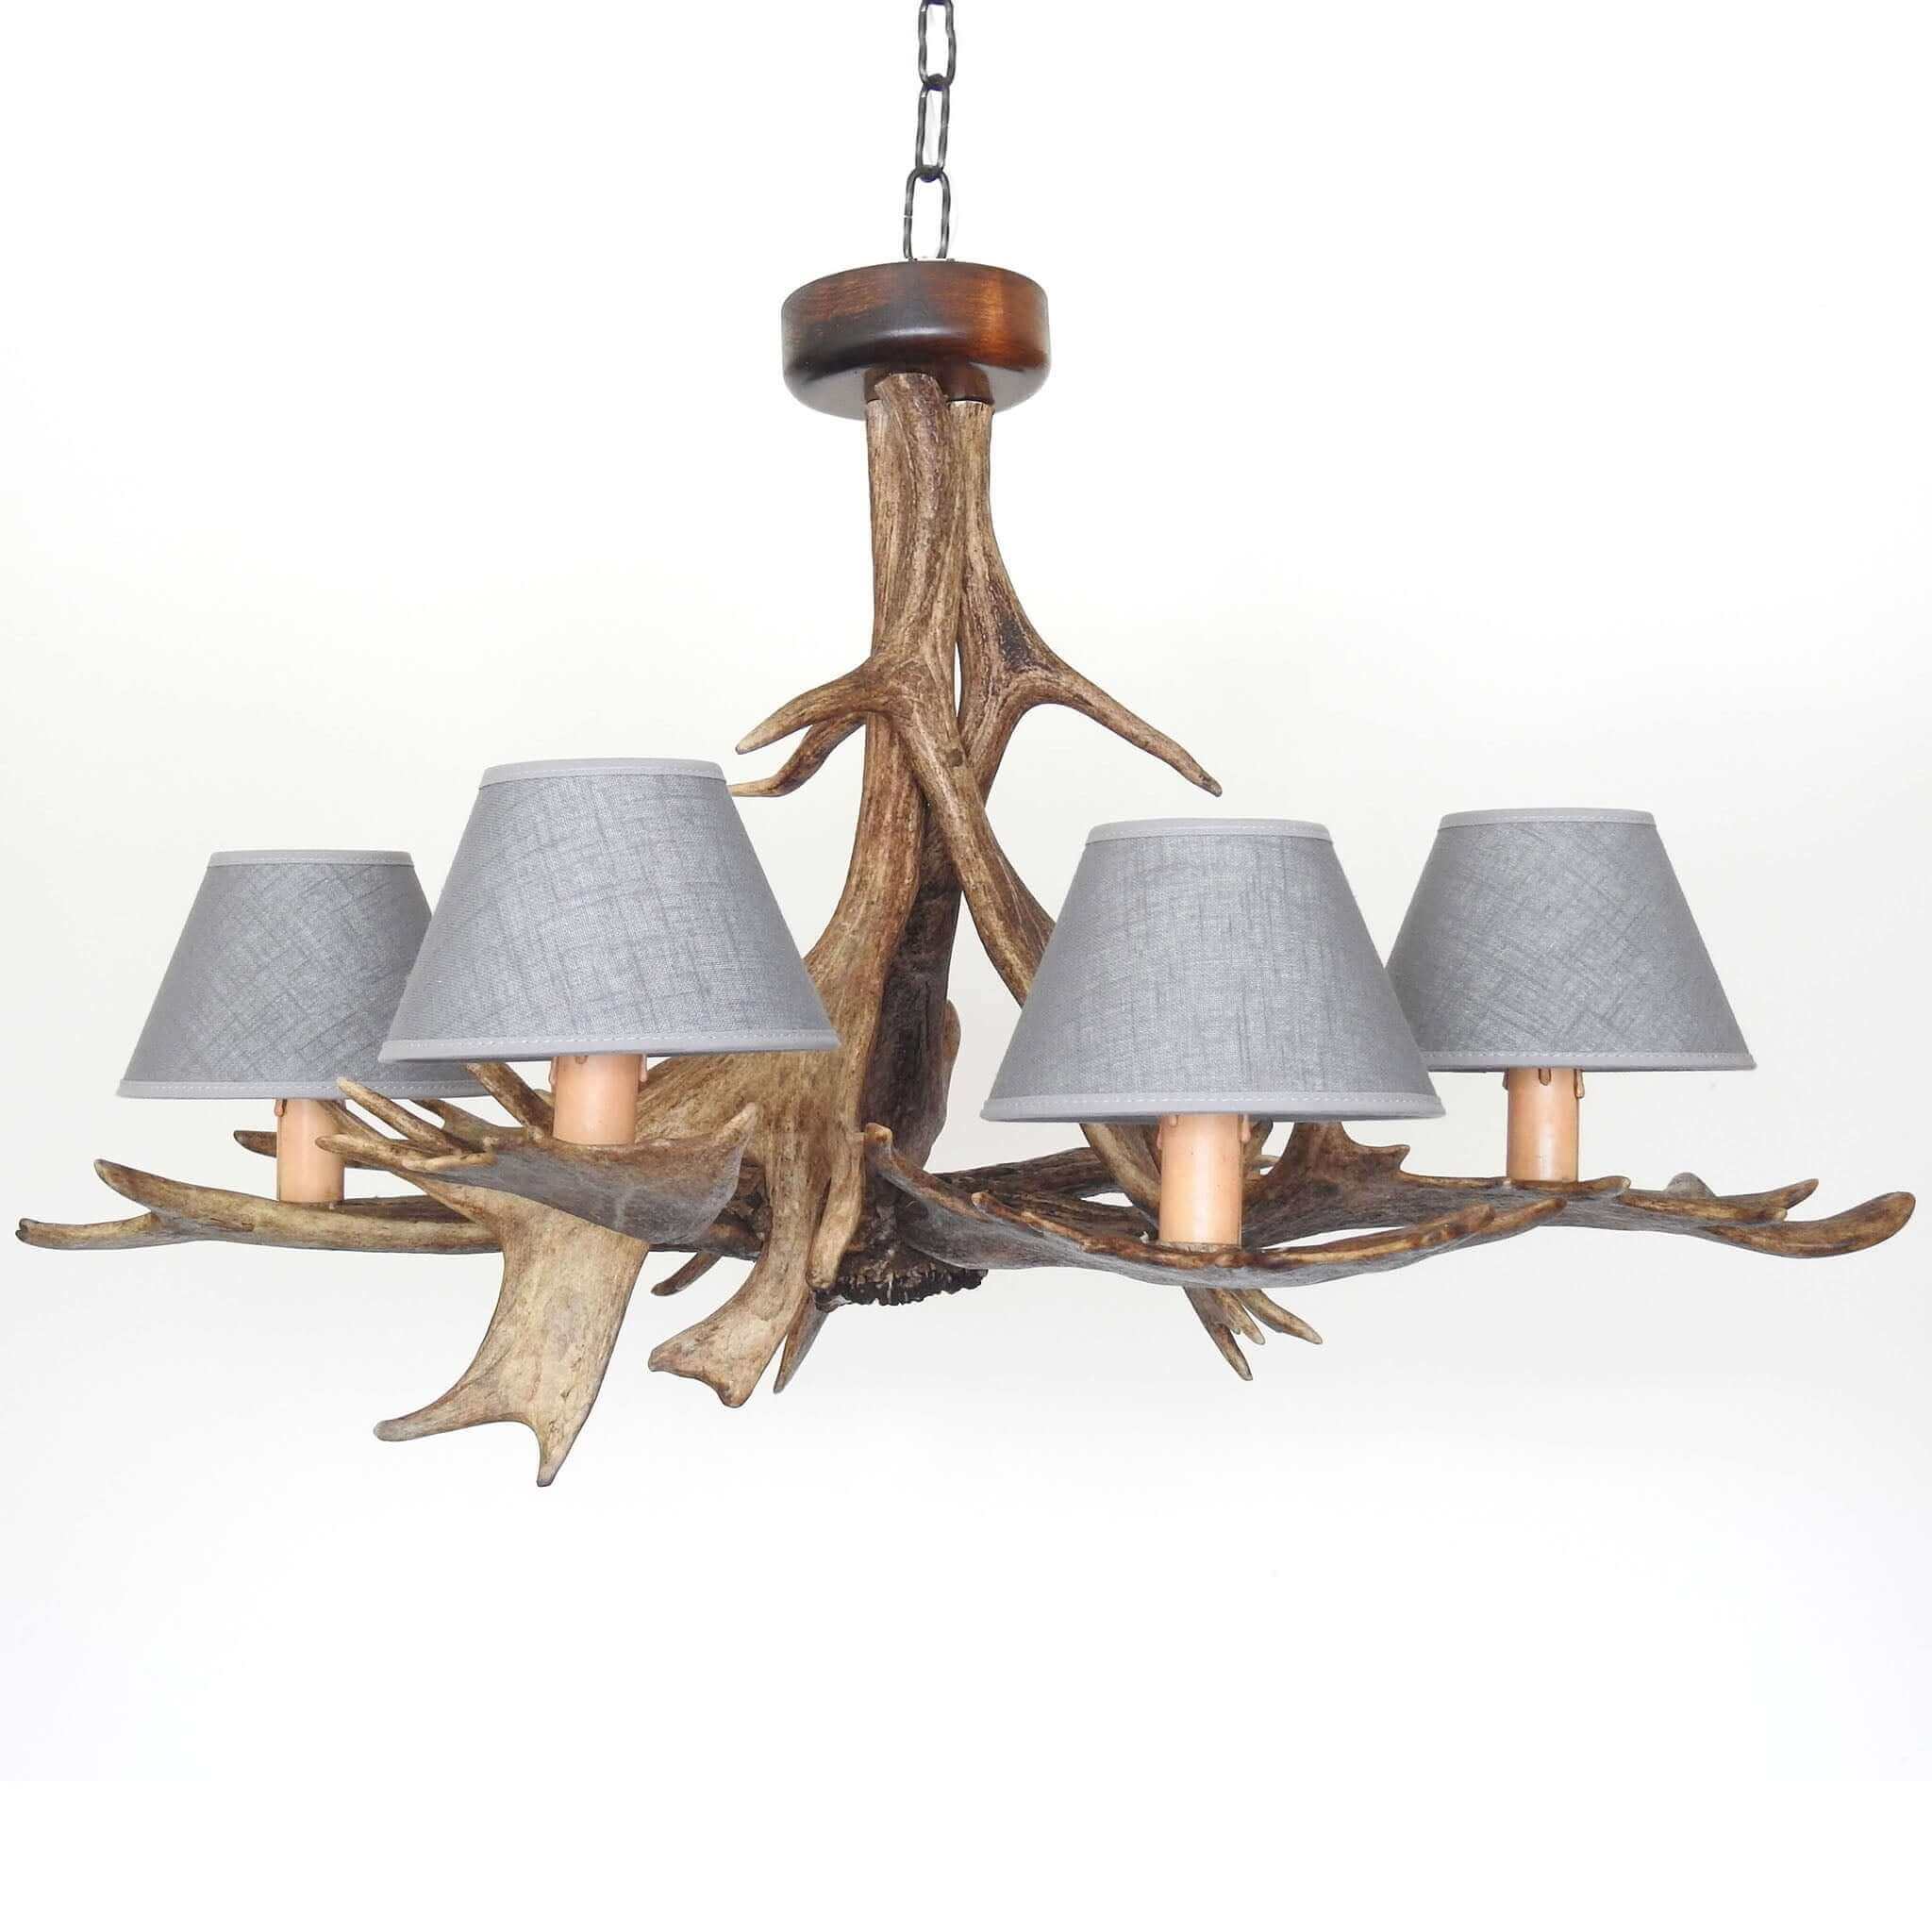 Rustic antler chandelier with shades.